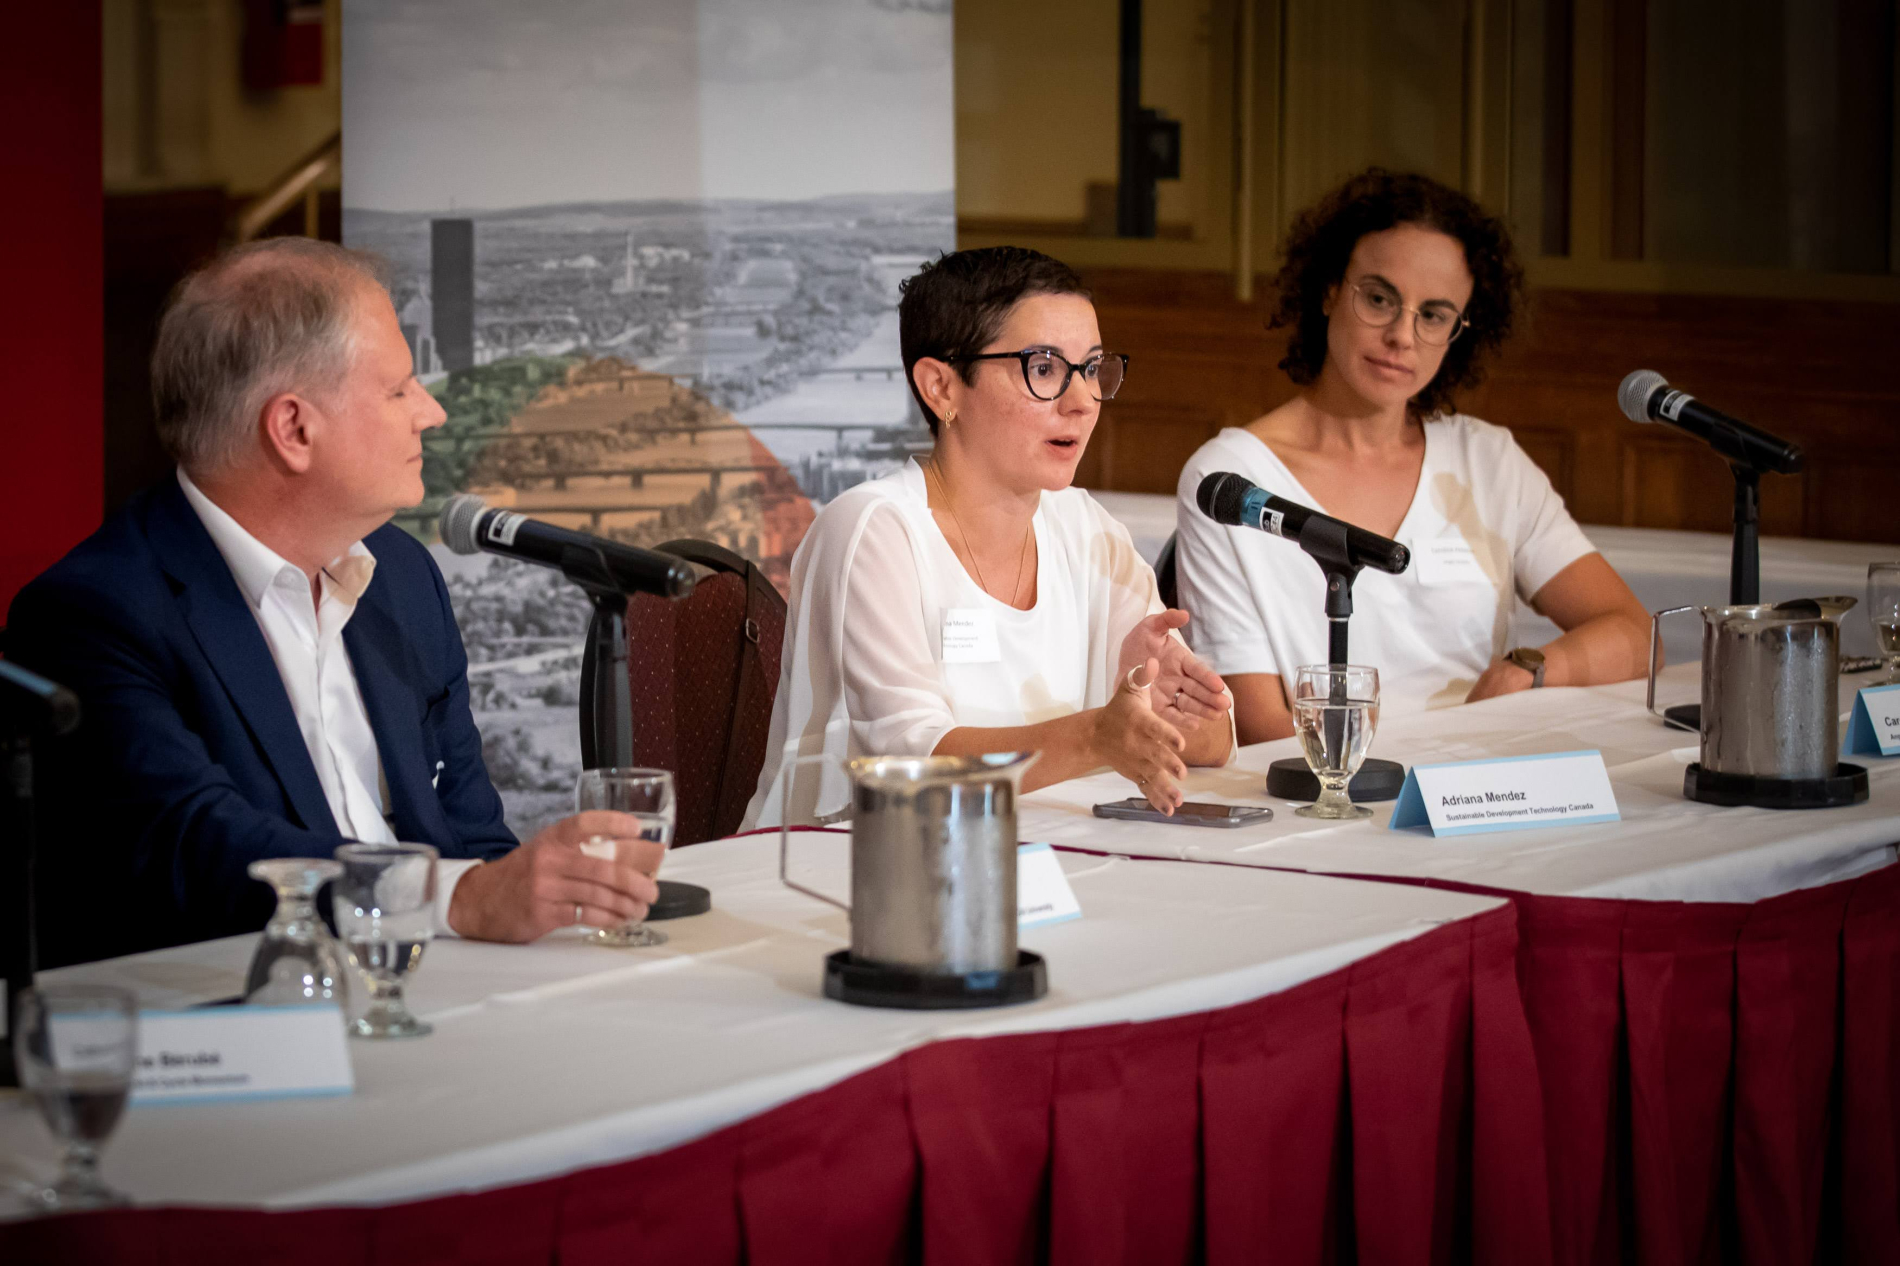 Three panelists seated at a table. The person in the centre is speaking into a microphone, while the other two watch her.